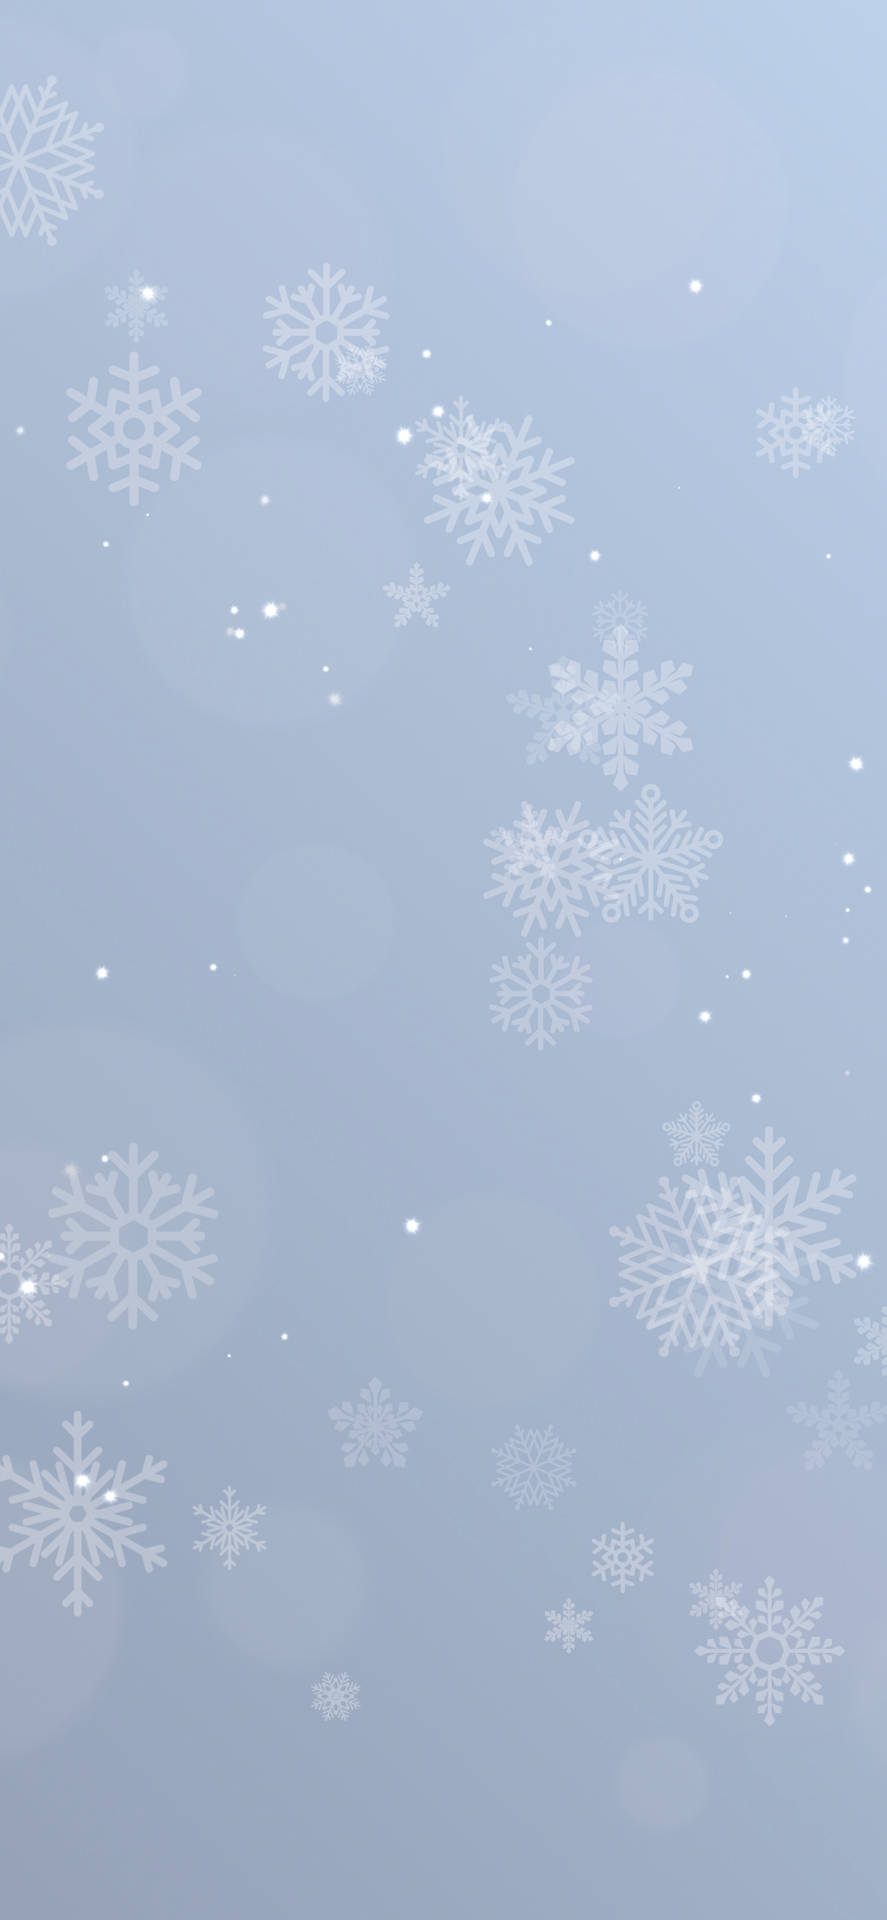 A White Background With Snowflakes On It Wallpaper